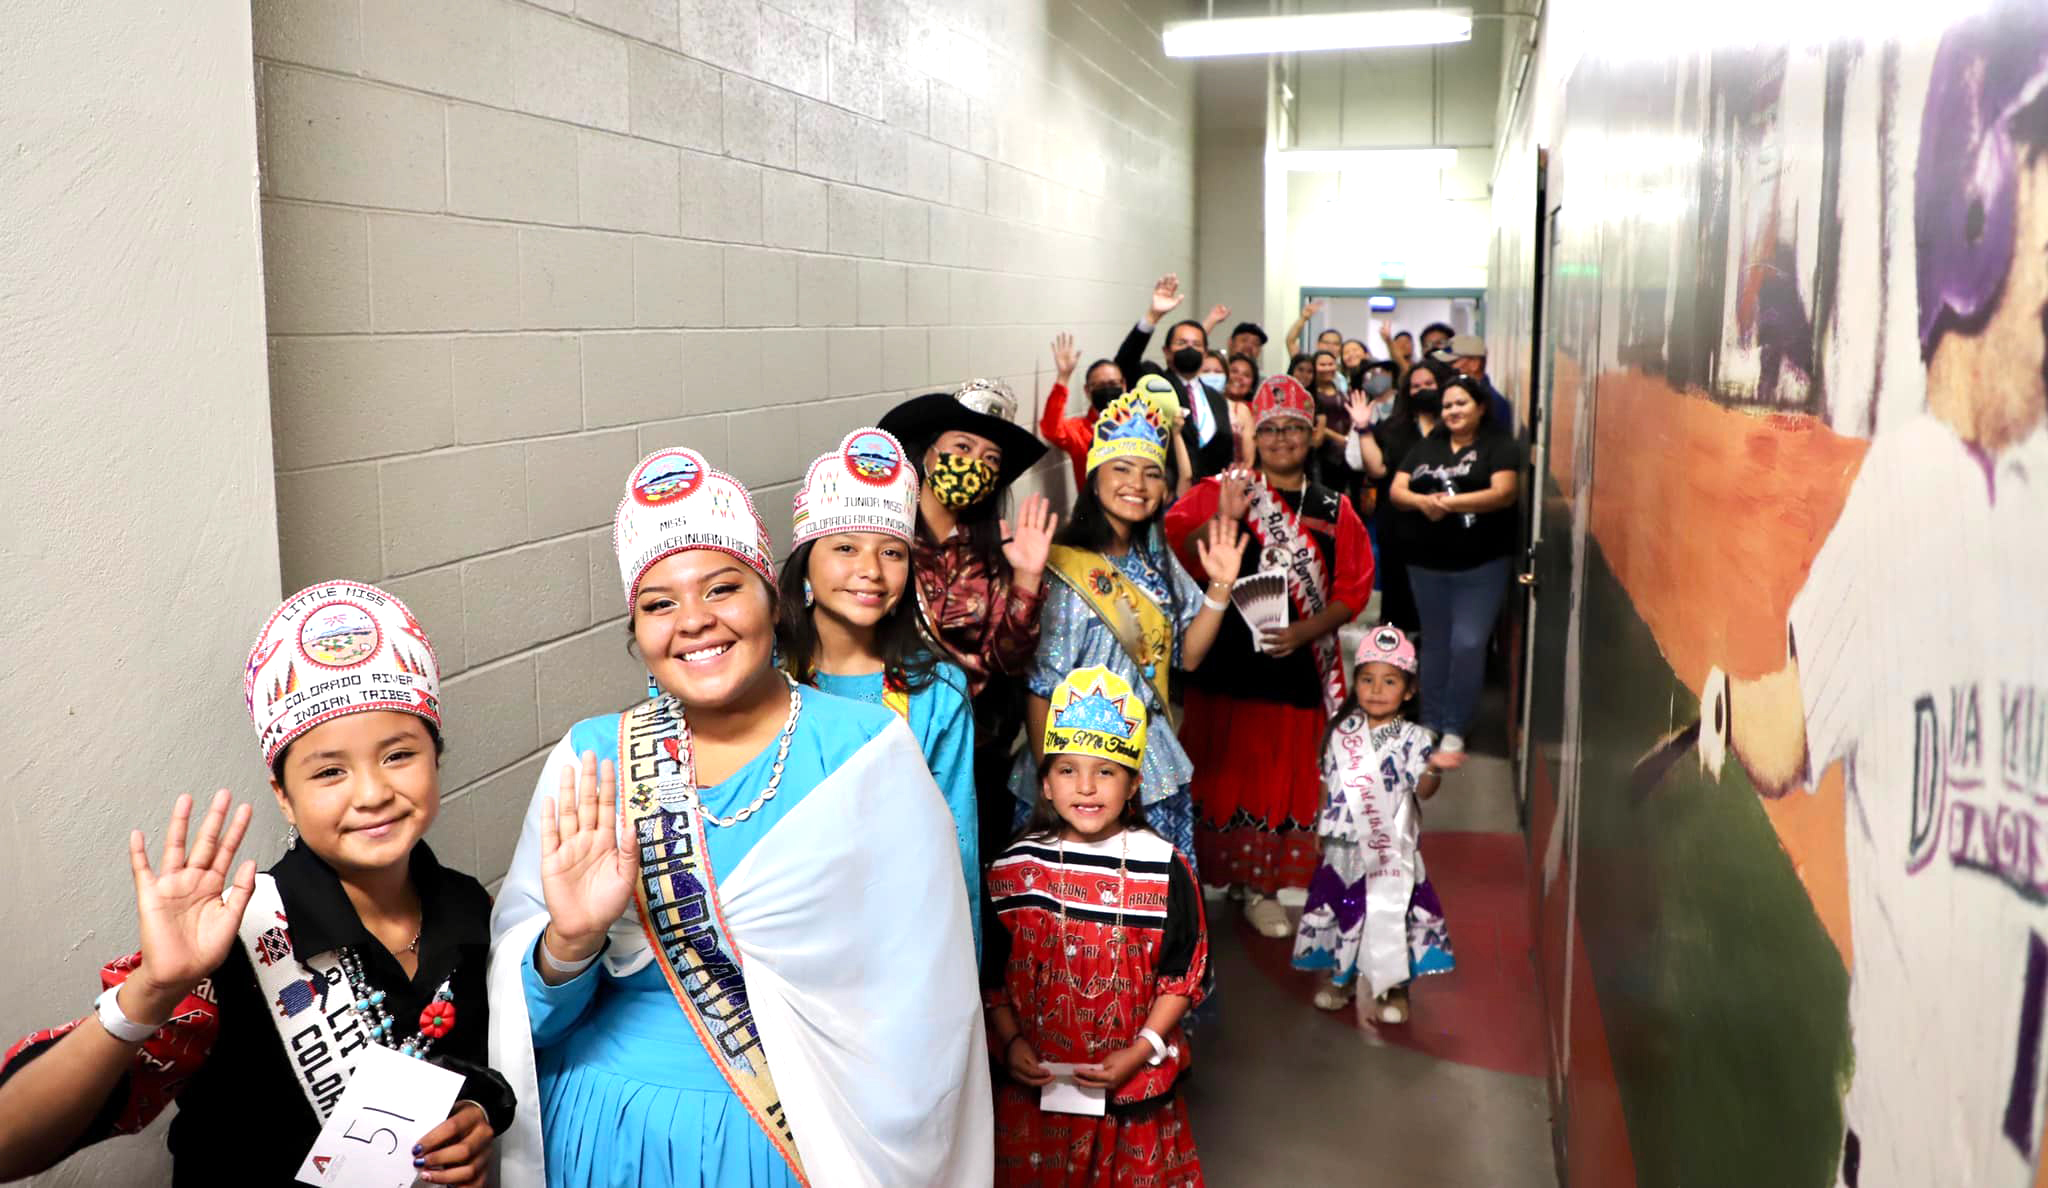 Dbacks recognize Arizona tribes with Native American Recognition Day and  tournament June 07, 2019 Articles